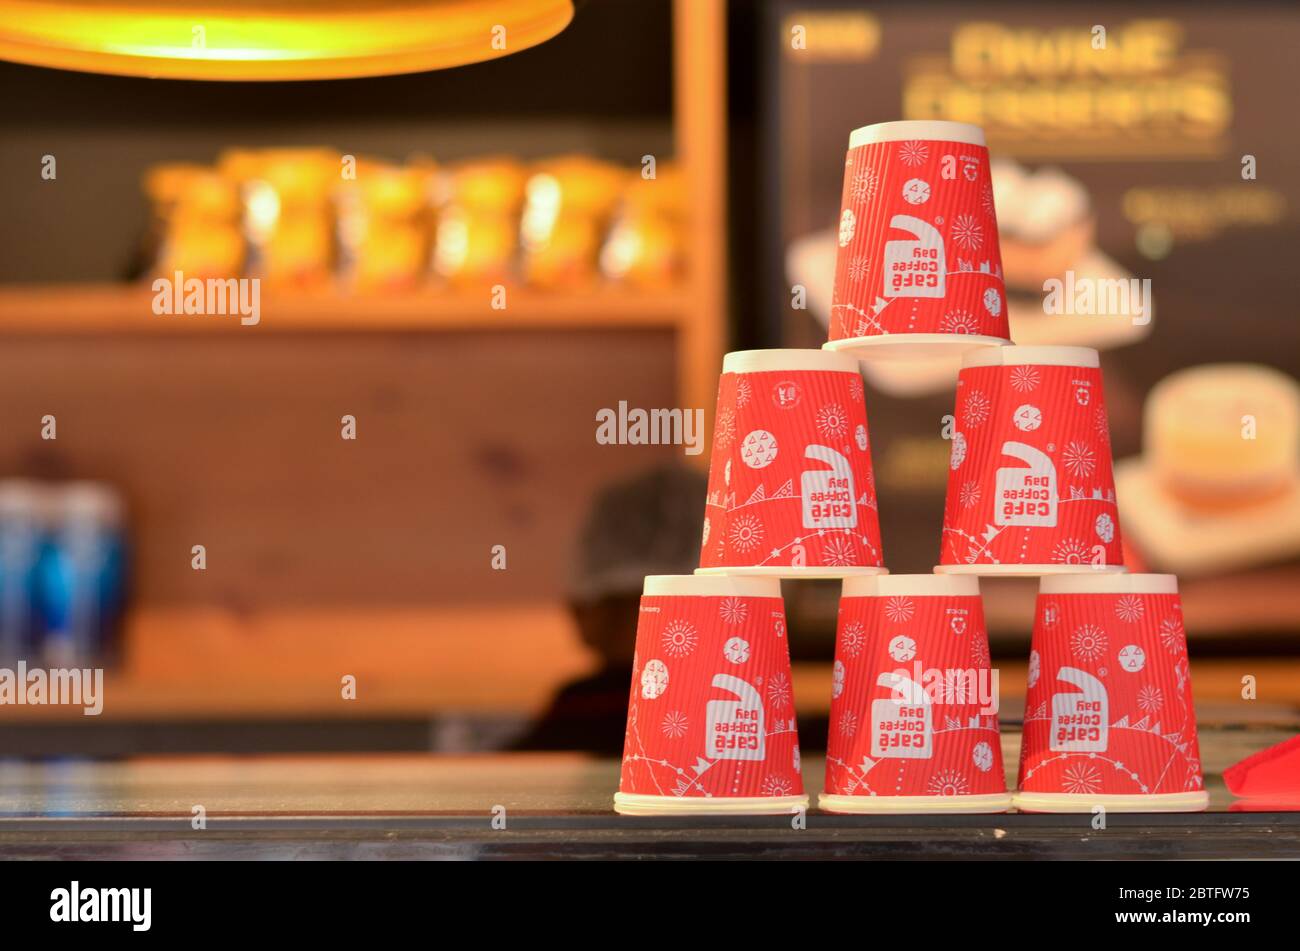 New Delhi, India, 2020. Red disposable cups with CCD (Cafe Coffee Day) logo stacked on top of each other making pyramids on the counter for display Stock Photo